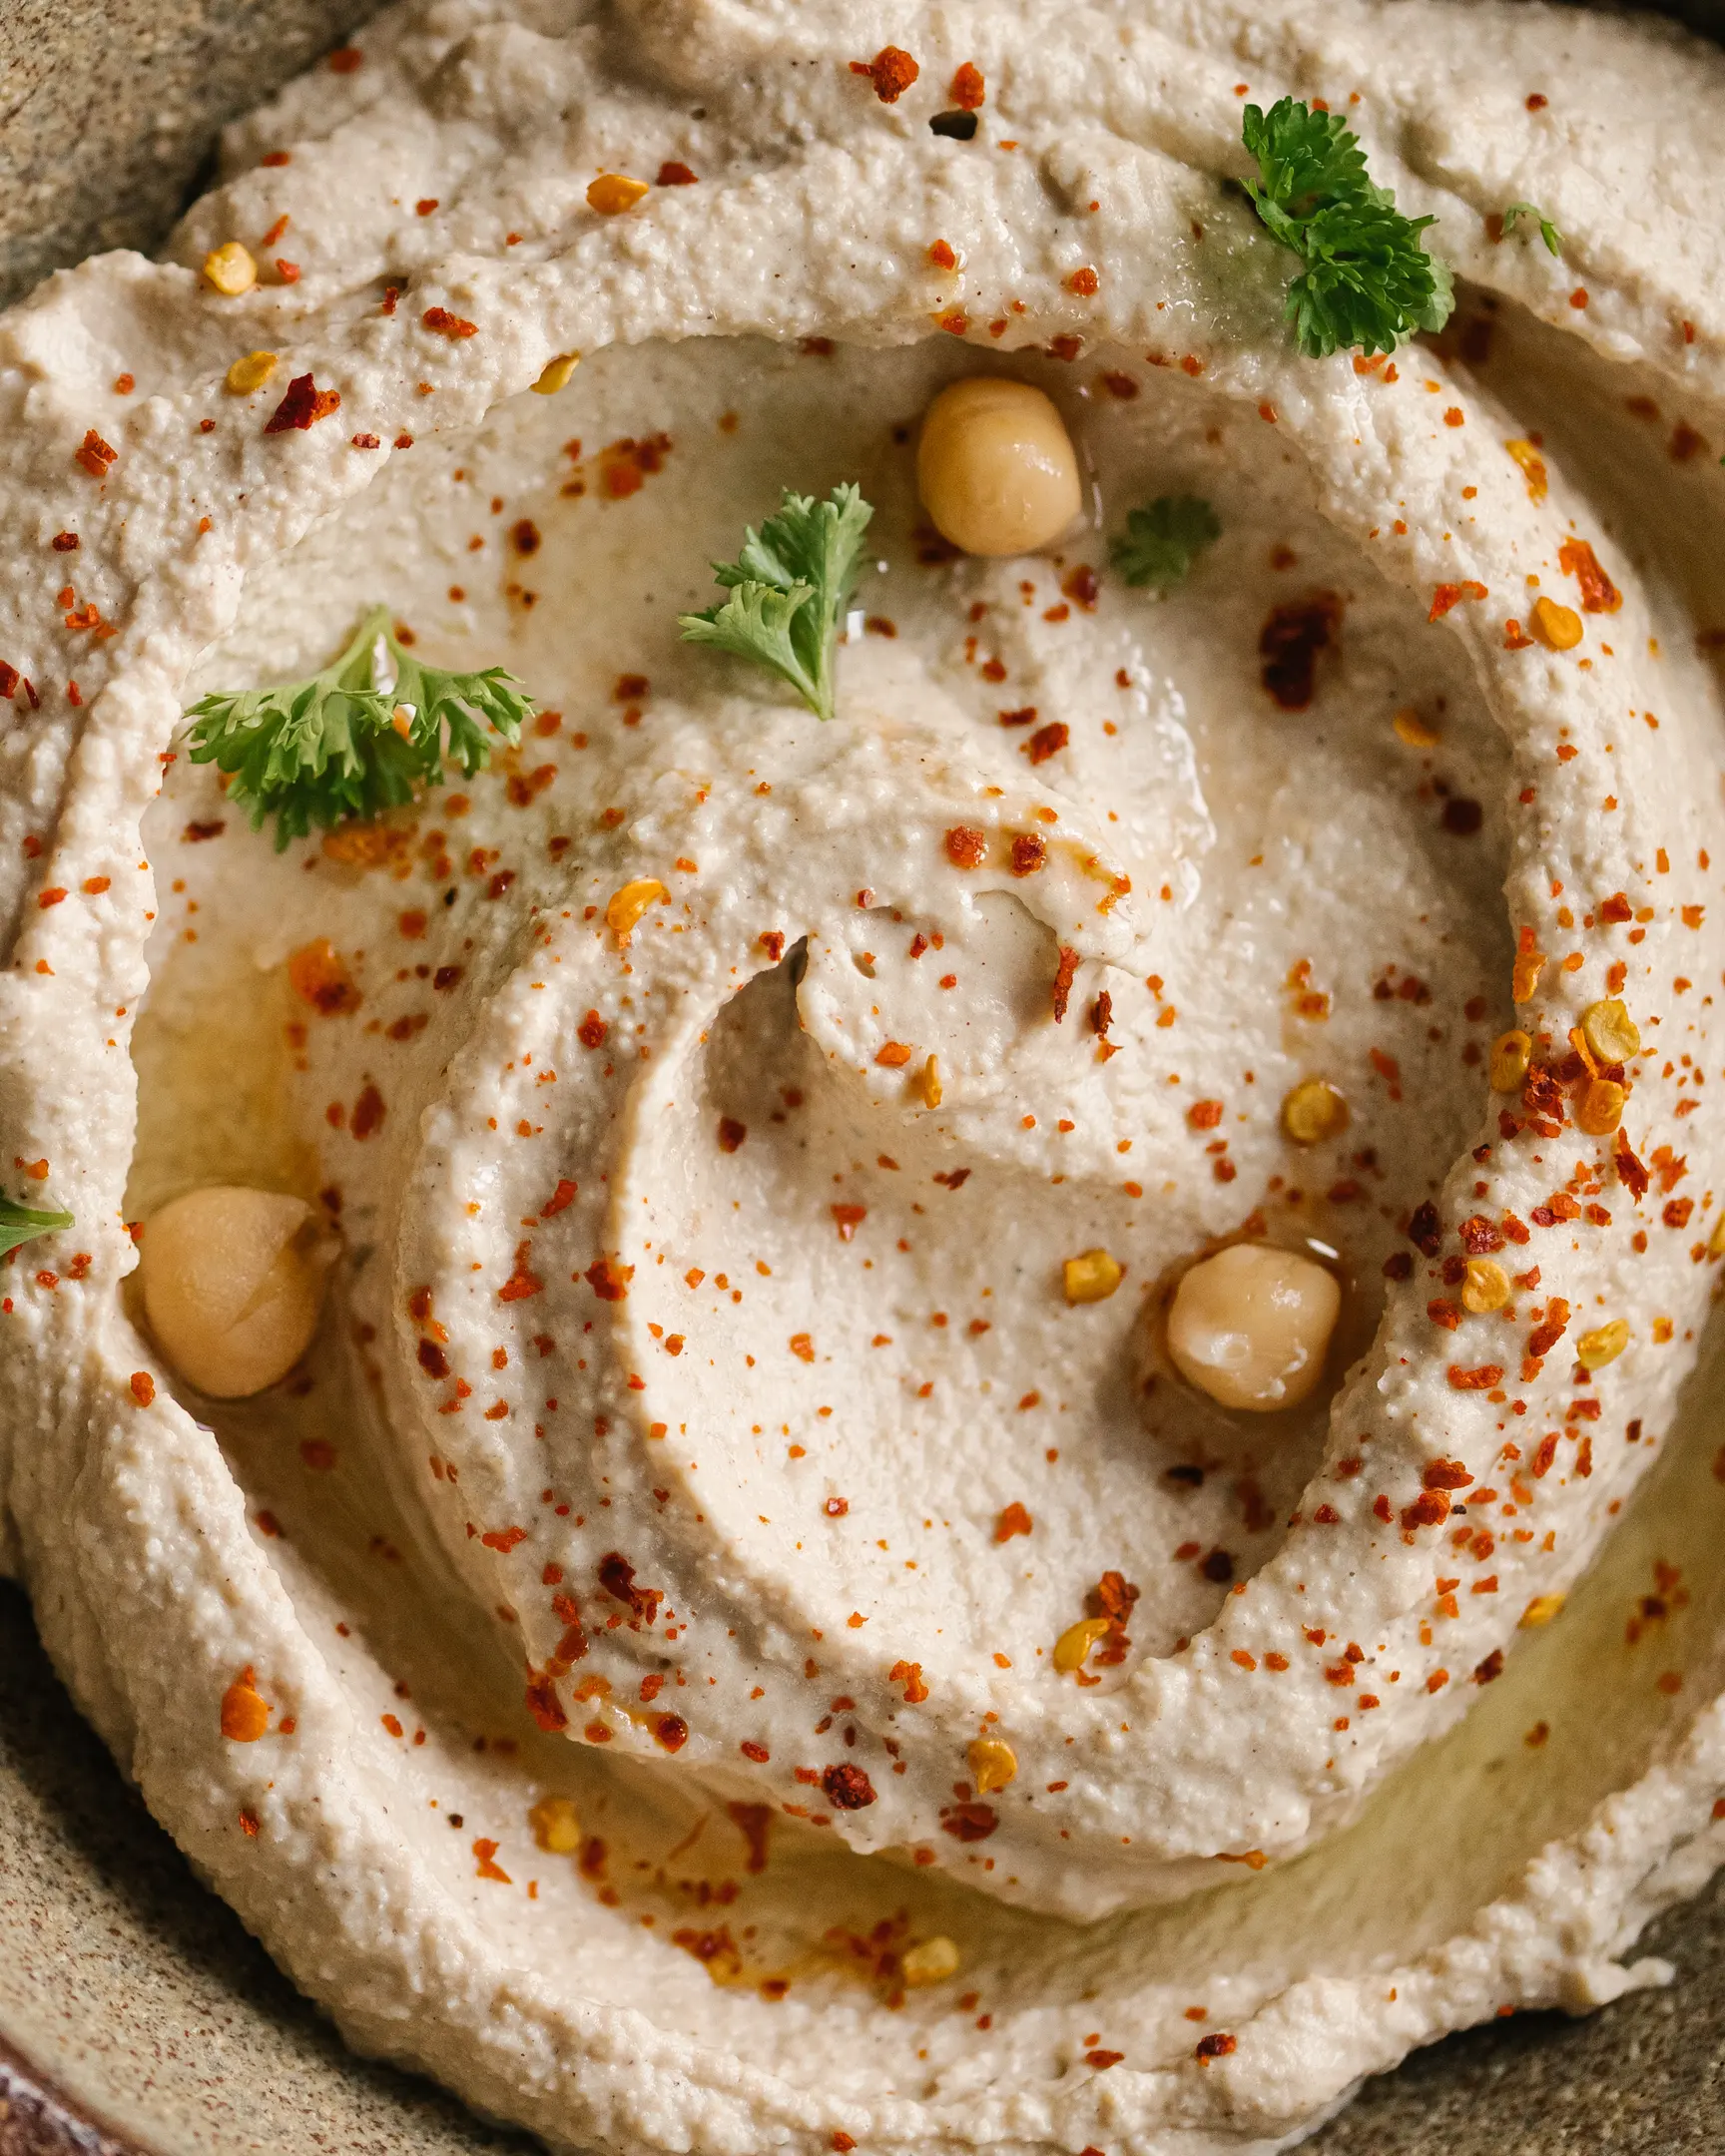 Humus In the photo on the plate is hummus beautifully laid in a curl. Hummus is garnished with chickpeas and herbs.